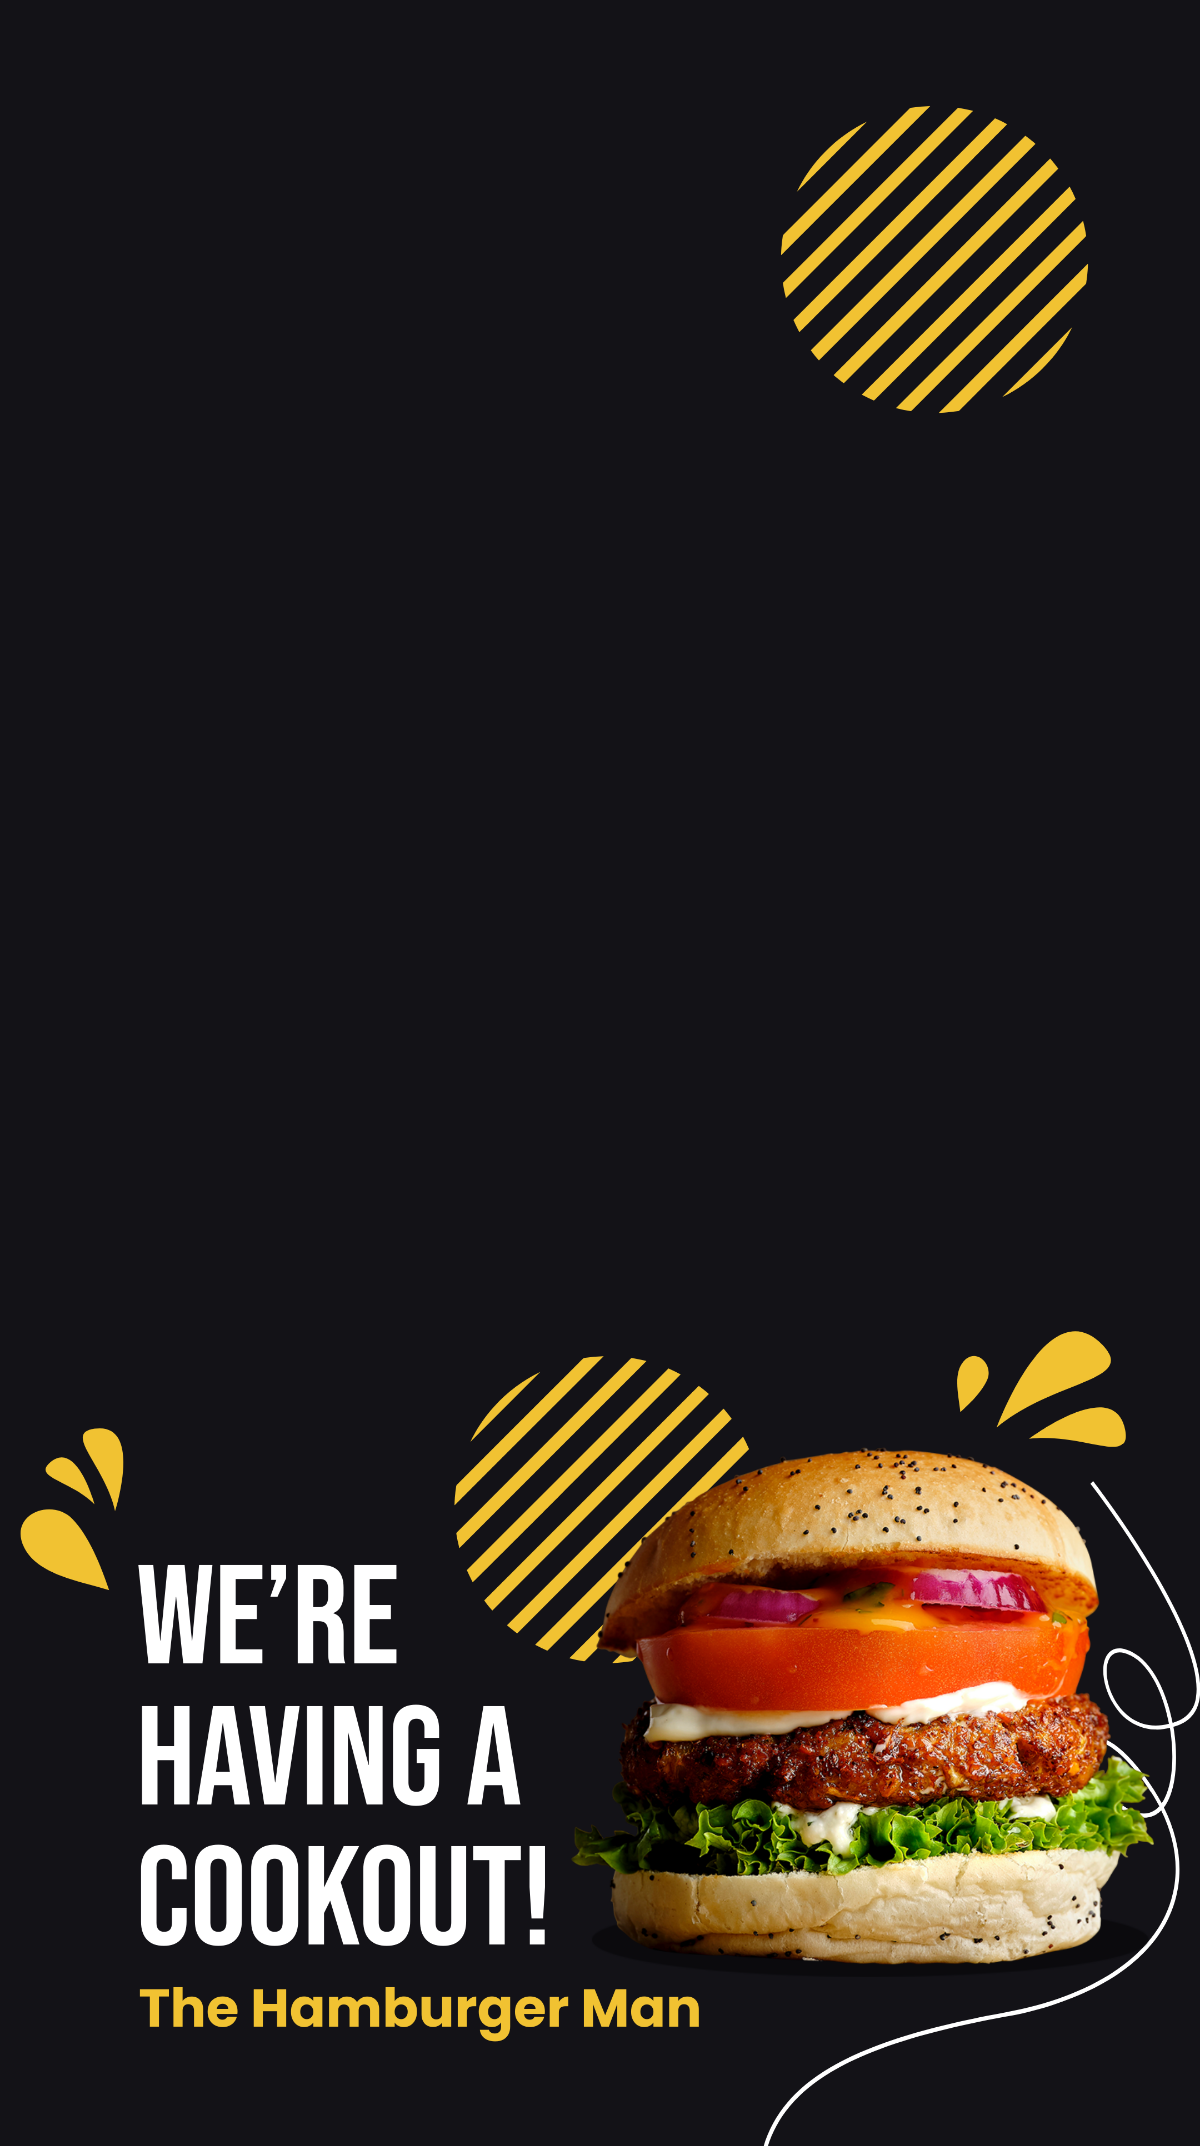 Free Cookout Invitation Snapchat Geofilter Template